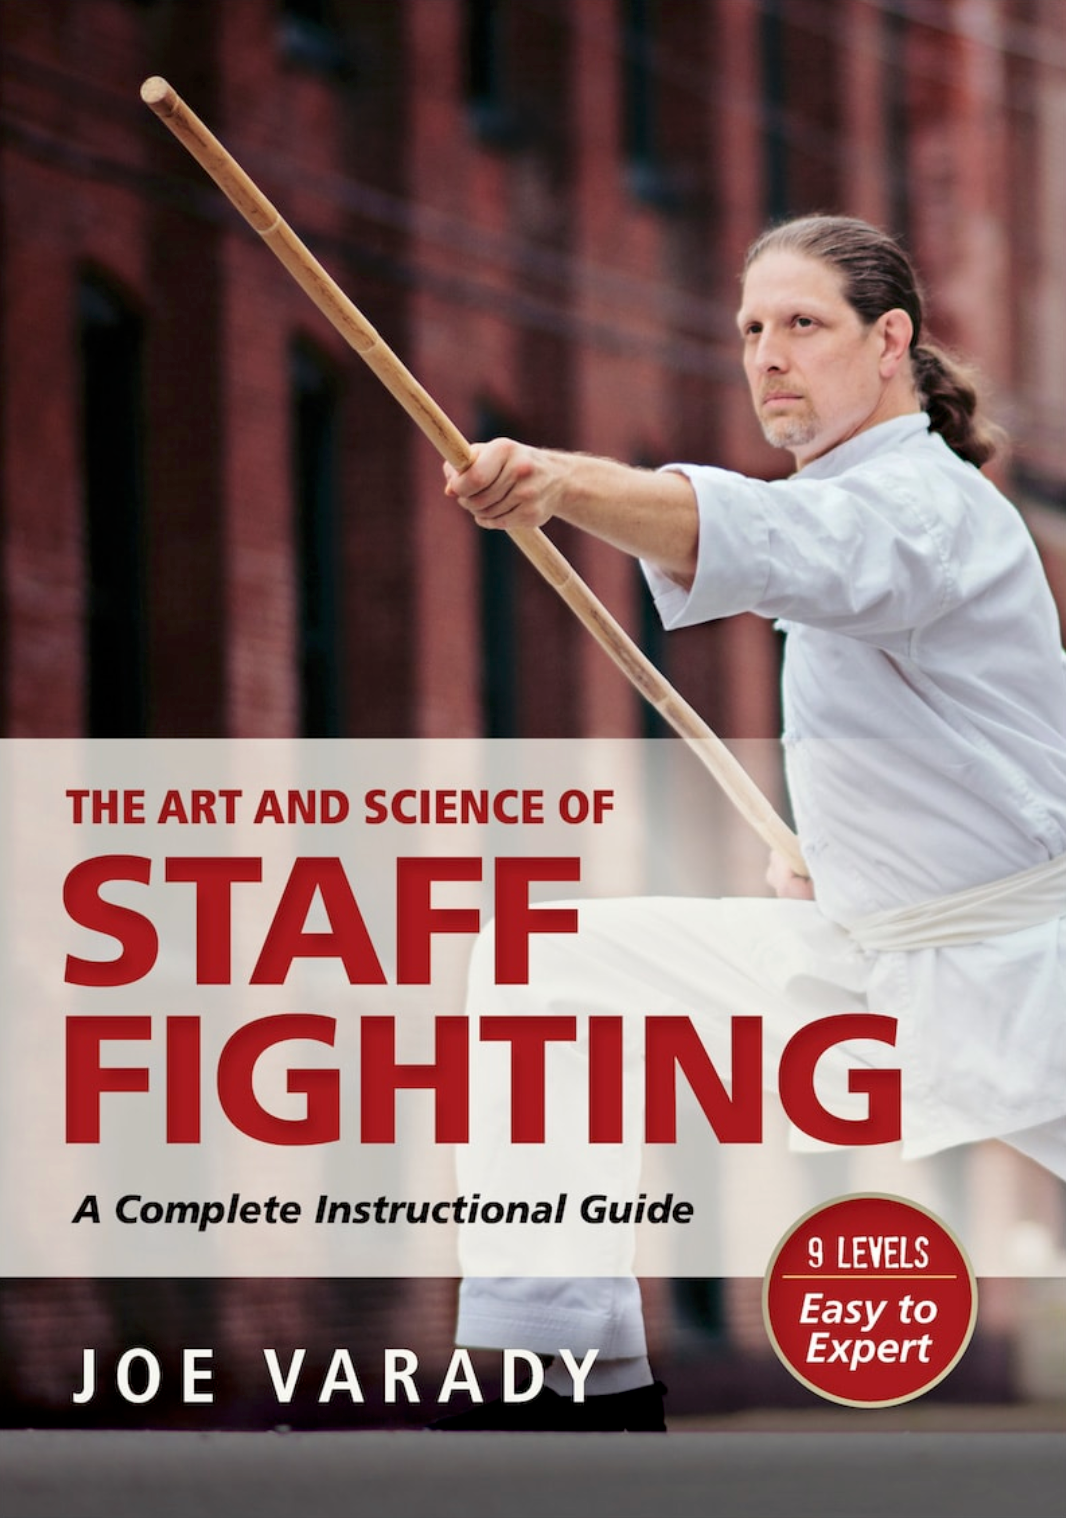 The Art and Science of Staff Fighting by Joe Varady (On Demand)